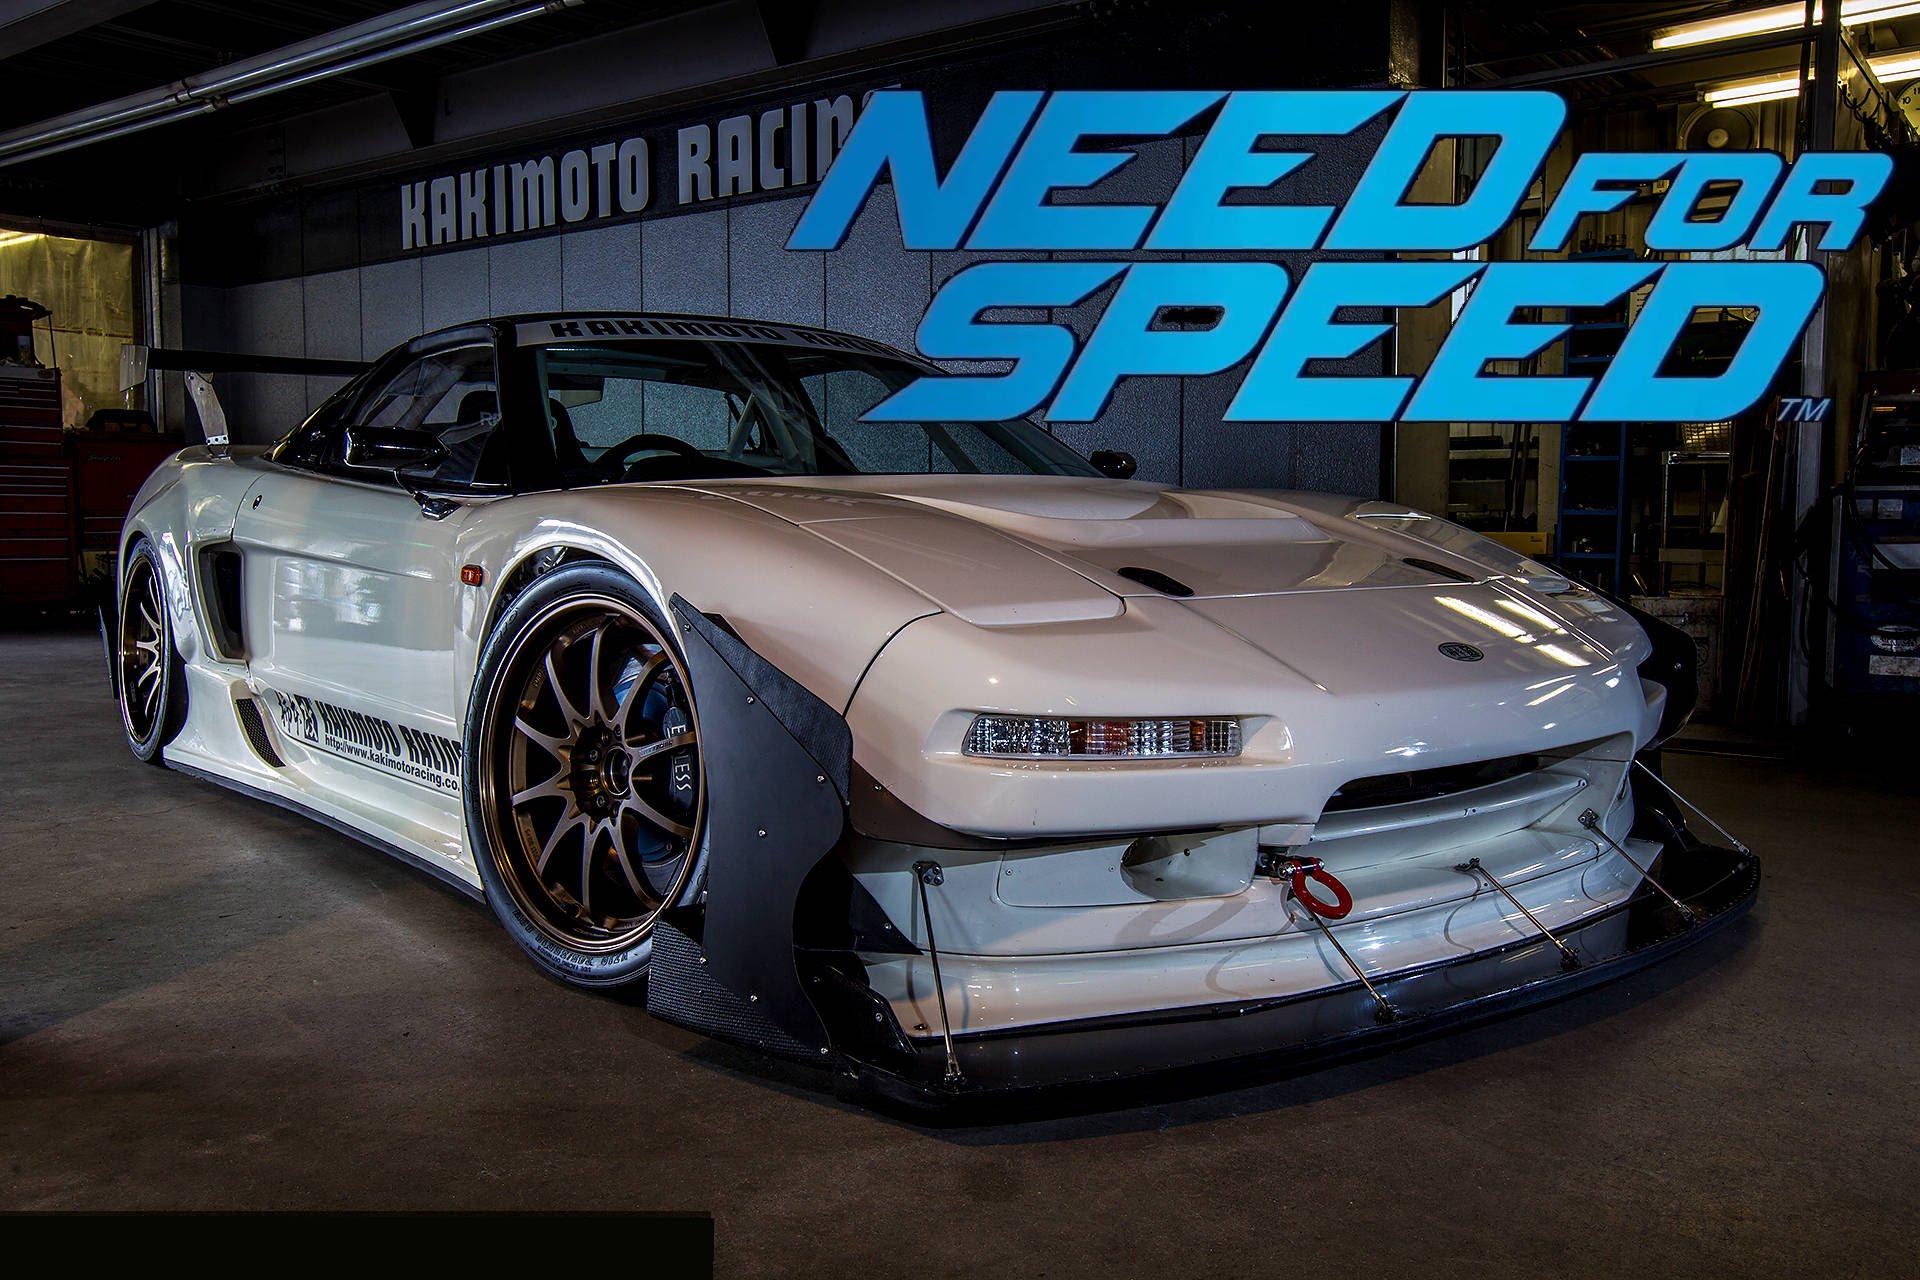 nfs 2015 free download